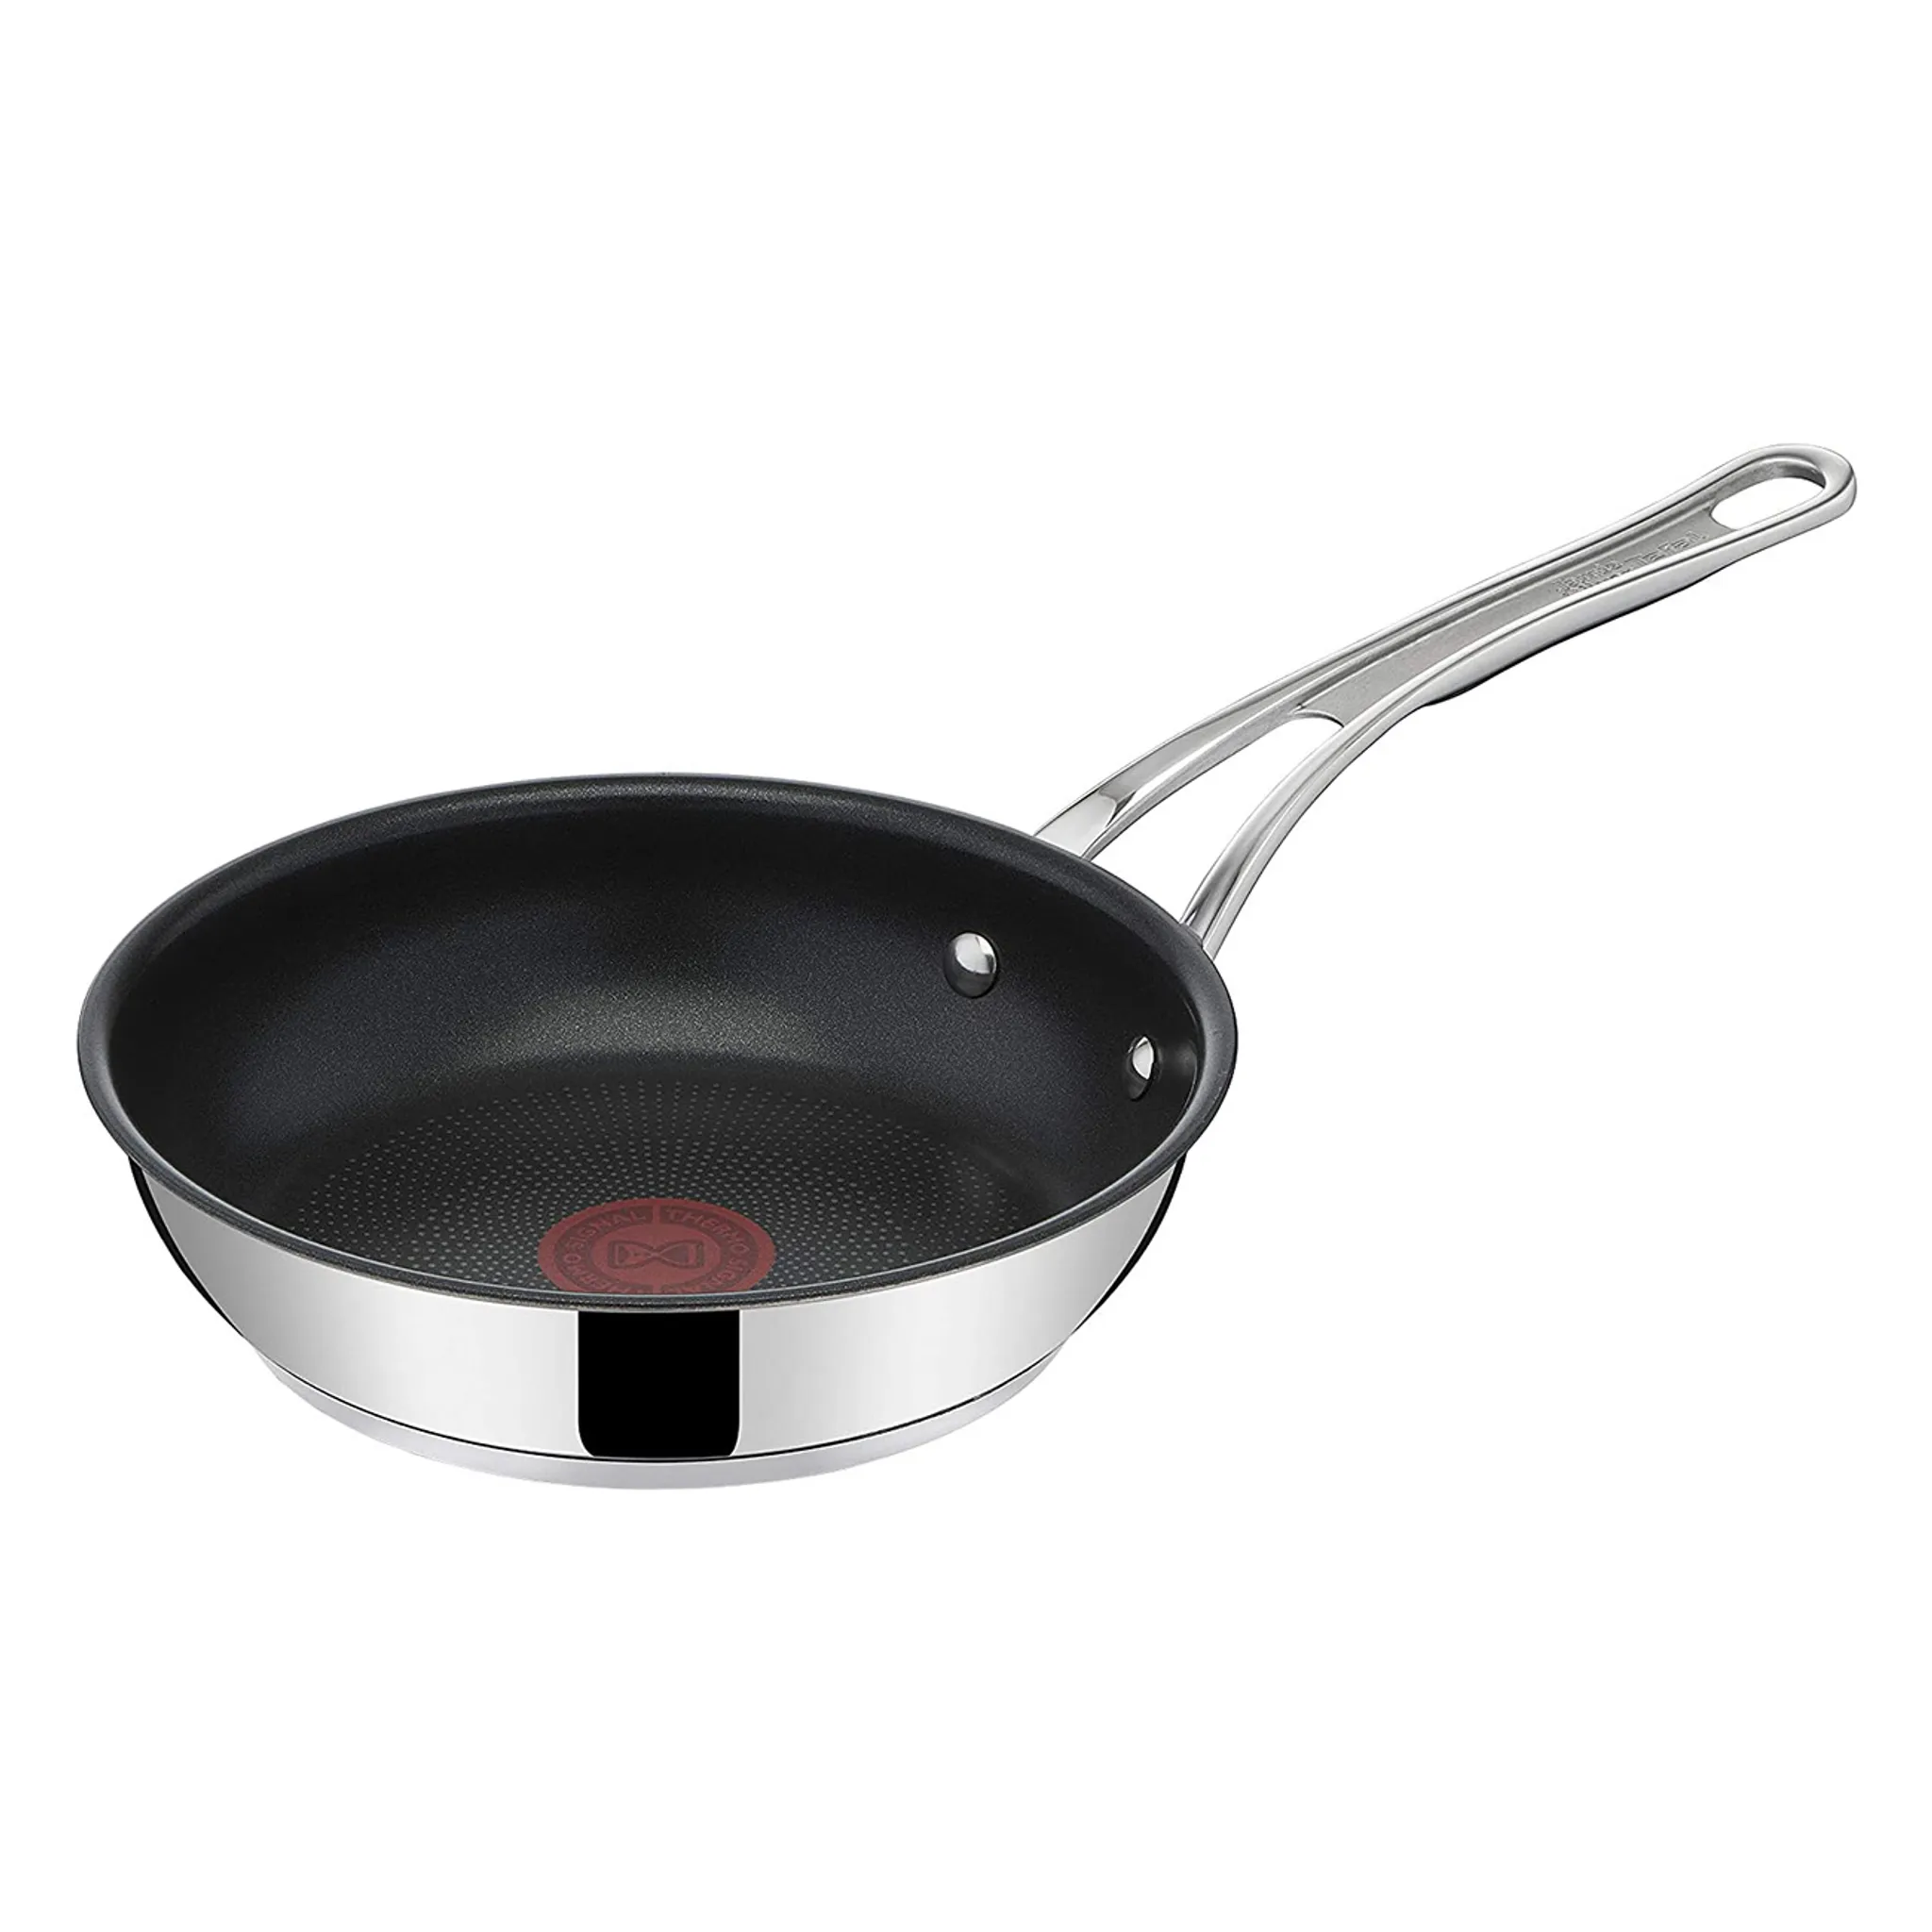 Tefal Jamie Oliver Cook's Classic Pfanne 24